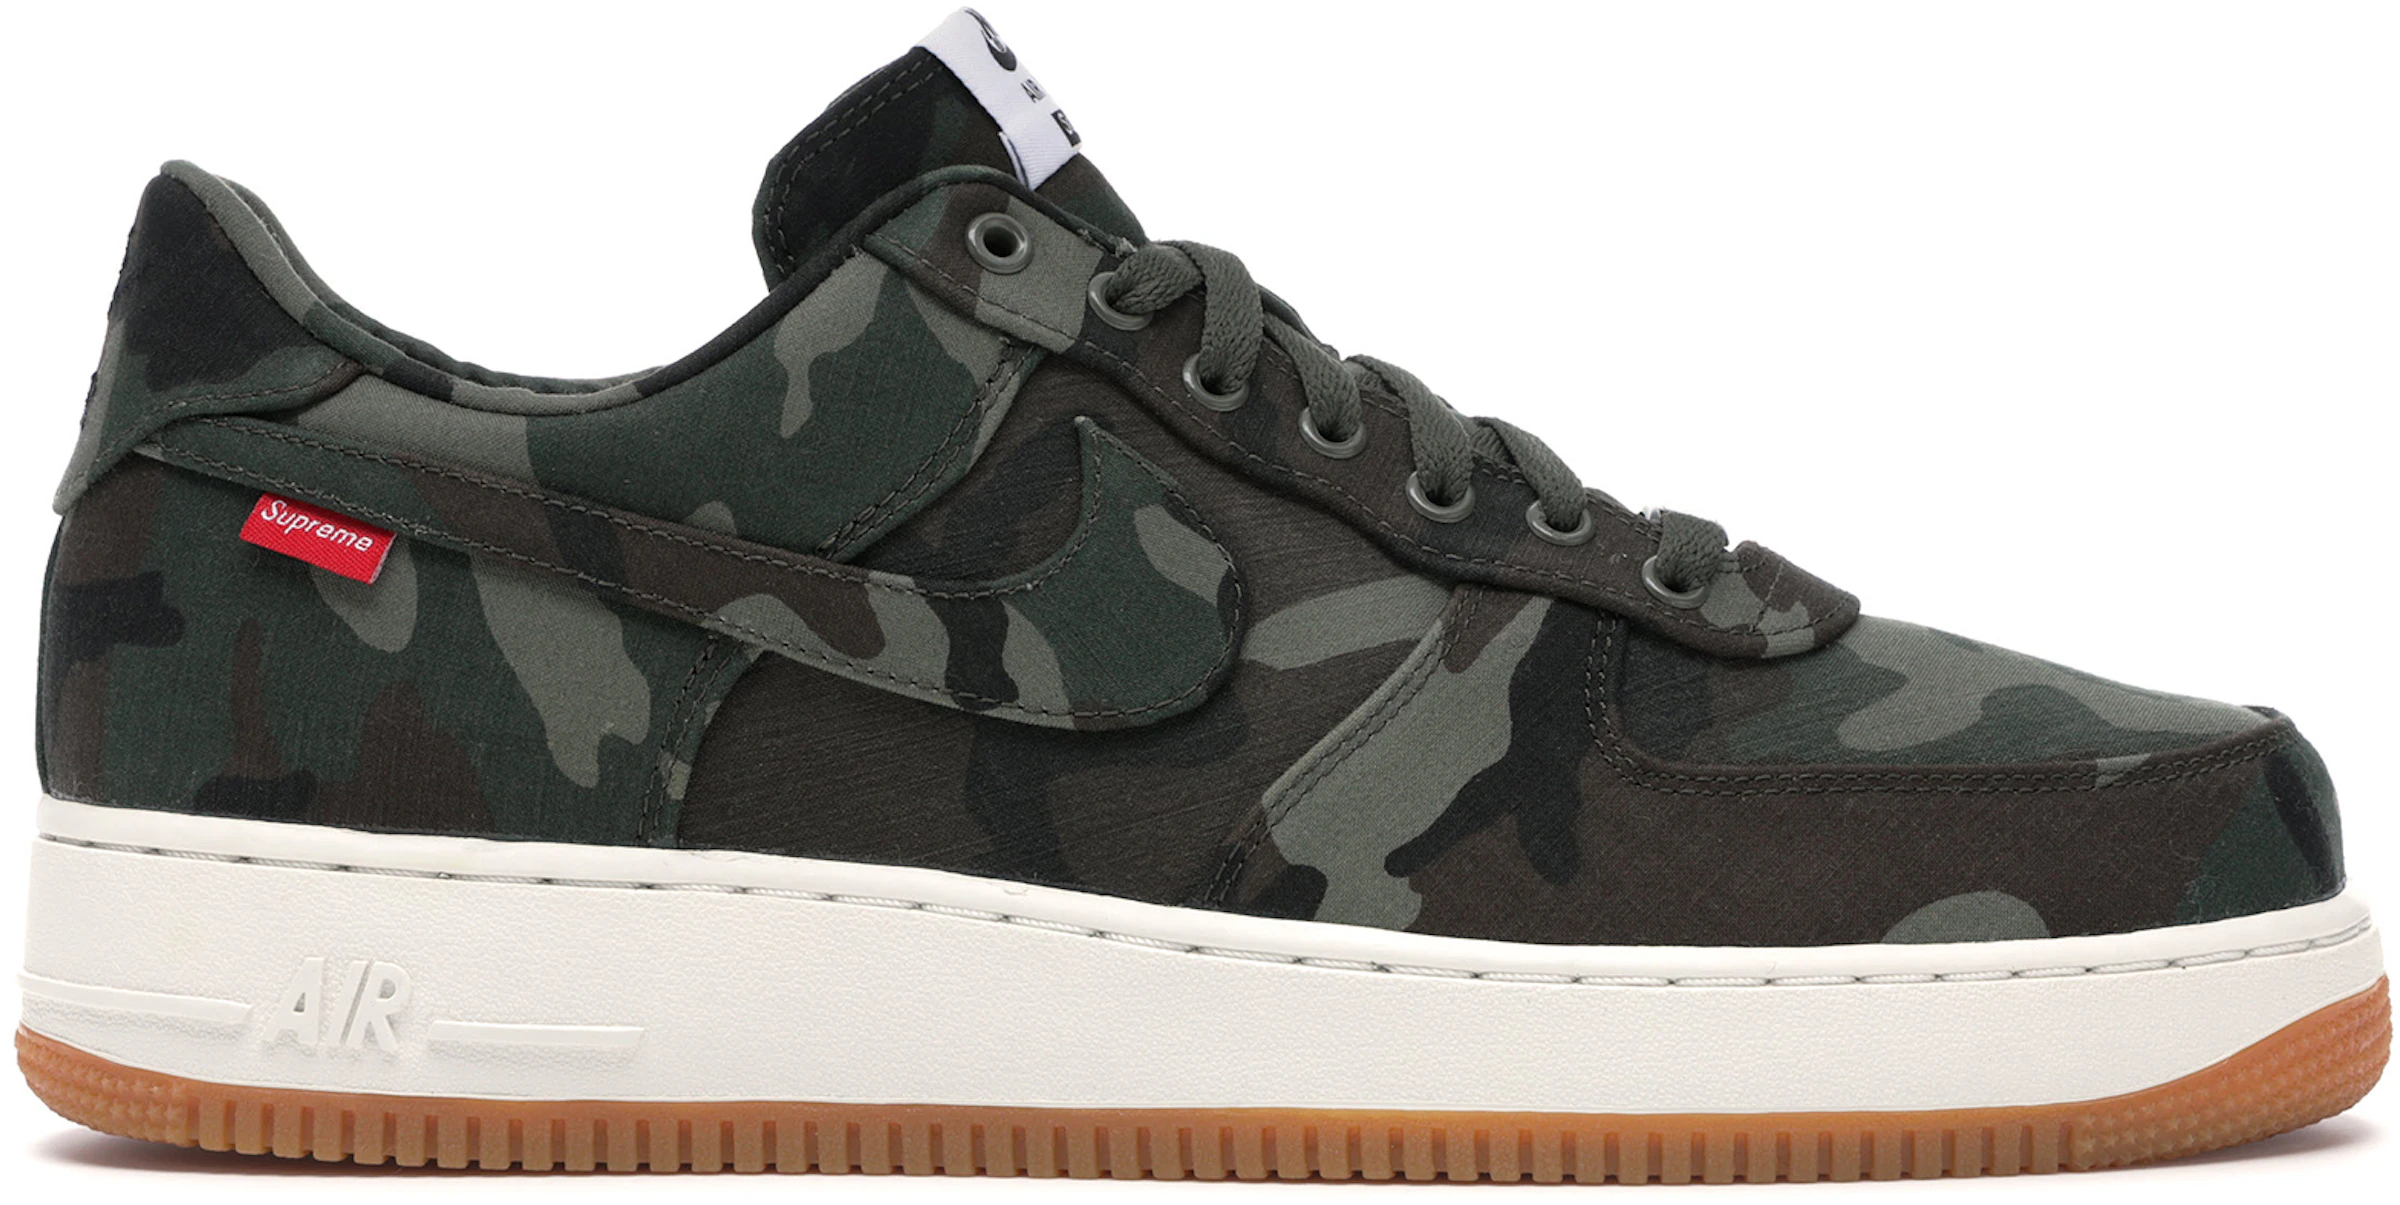 Force Low Supreme Camouflage - 573488-330 - ES